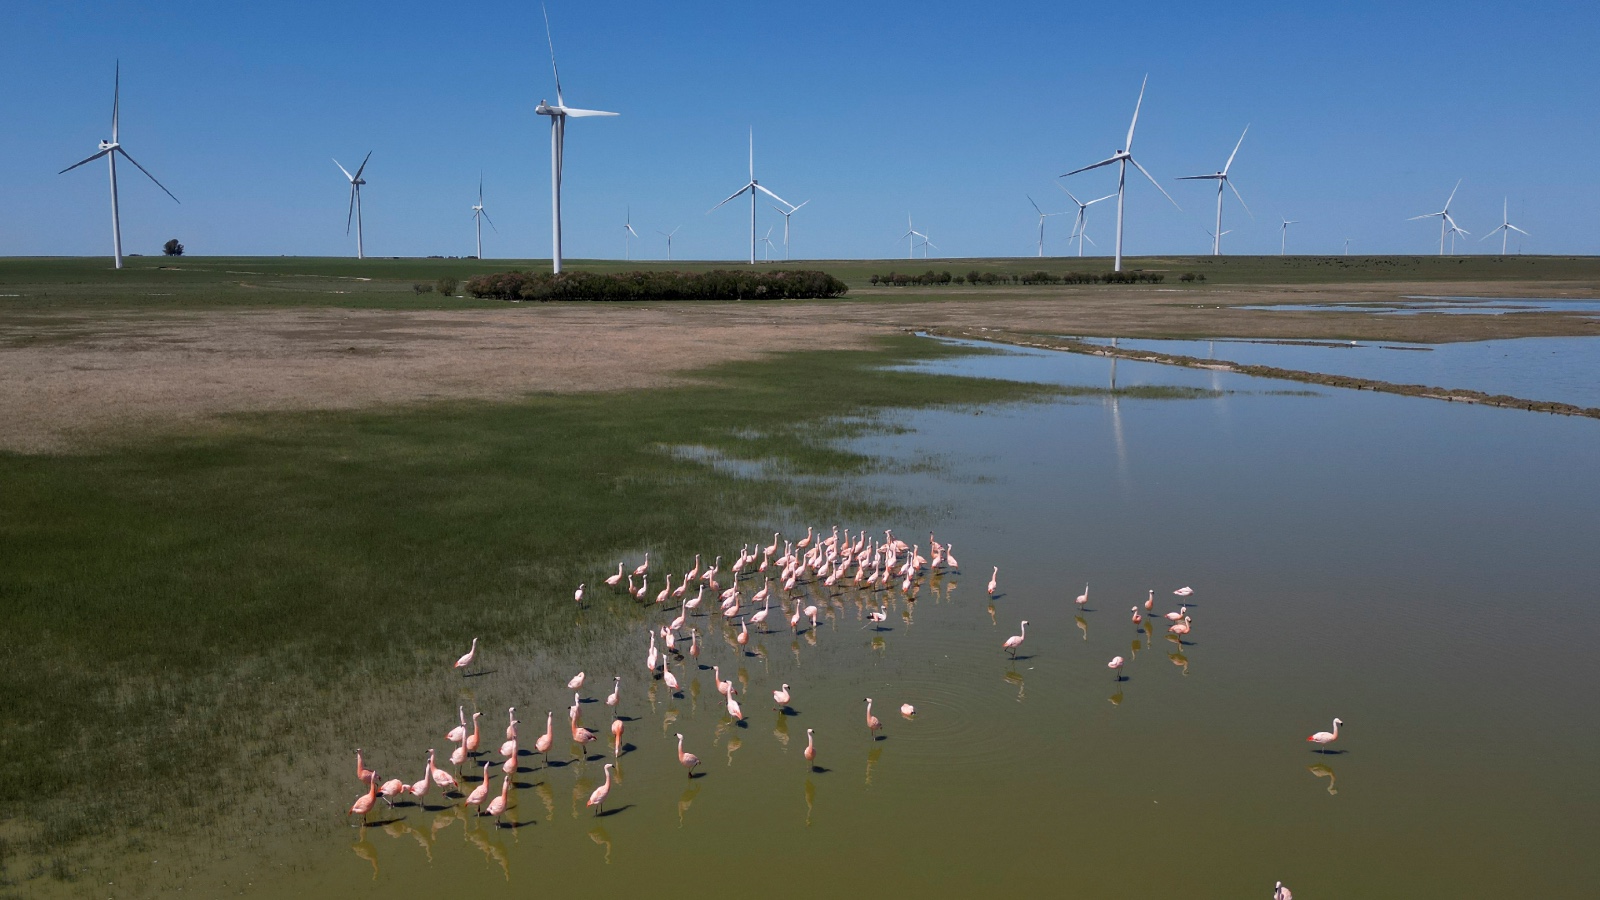 Flamingoes rest in a pond near in a wind farm